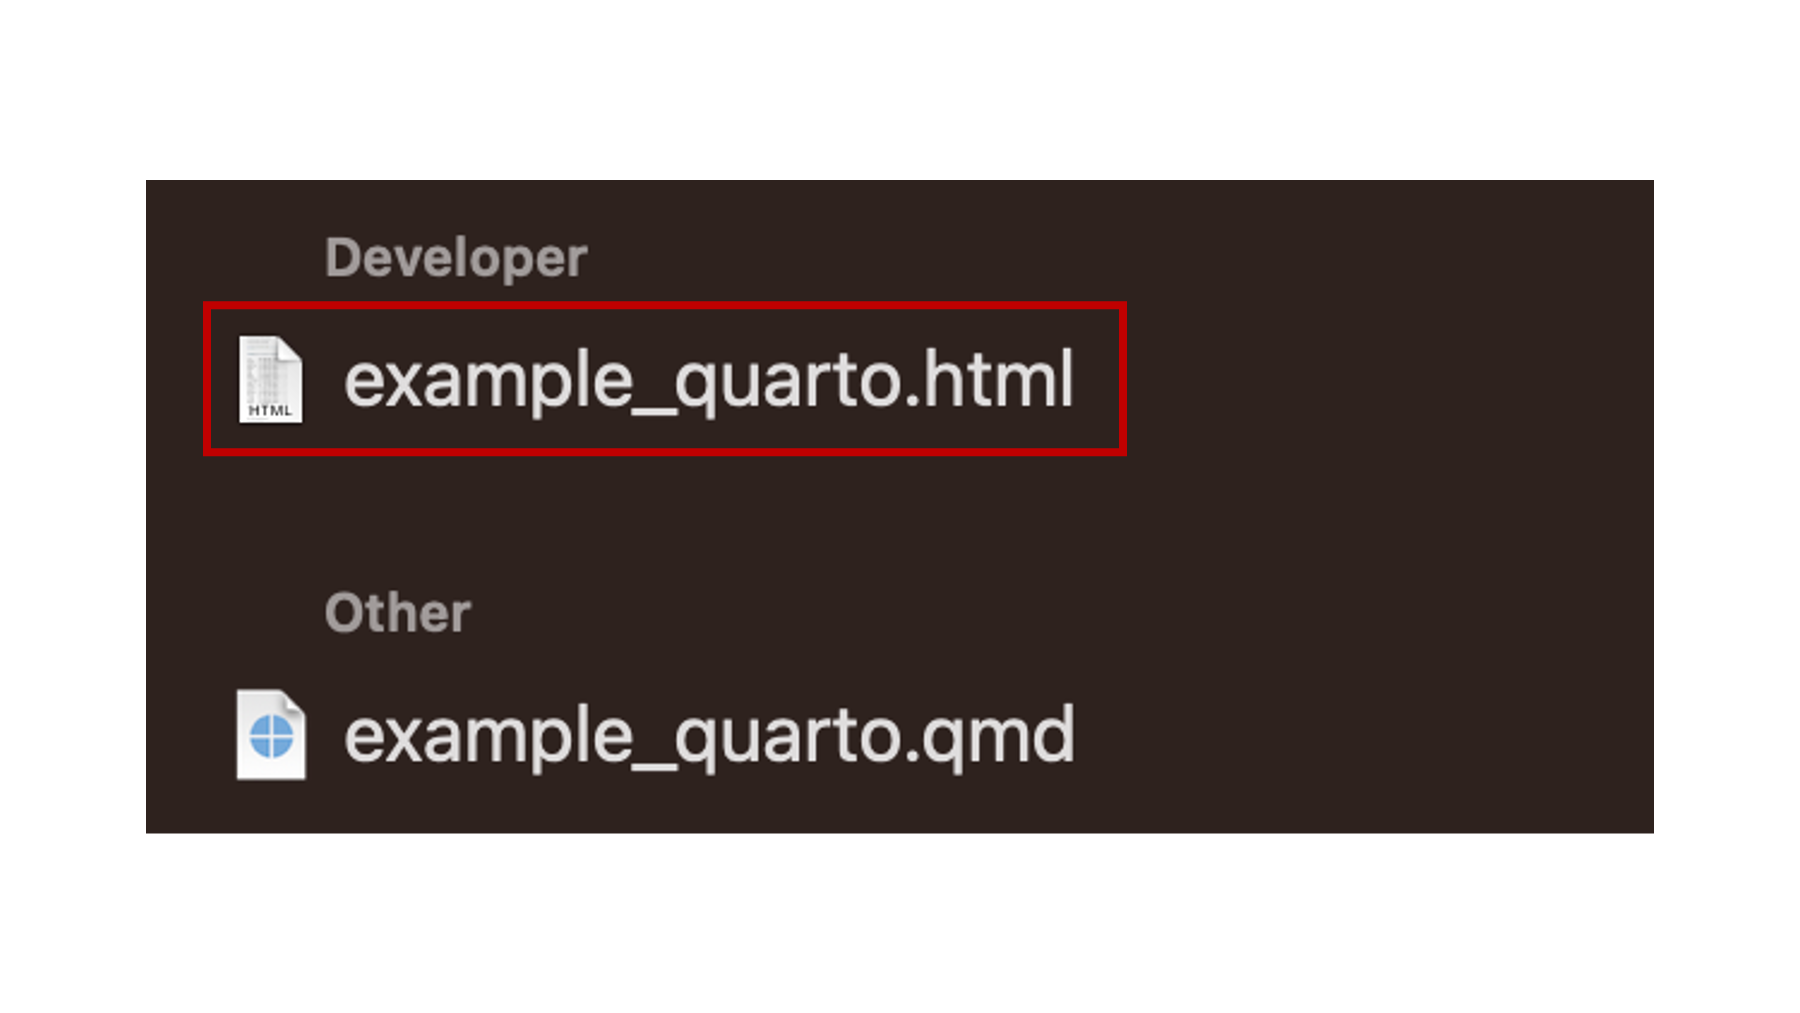 Quarto file and rendered HTML file and on MacOS.